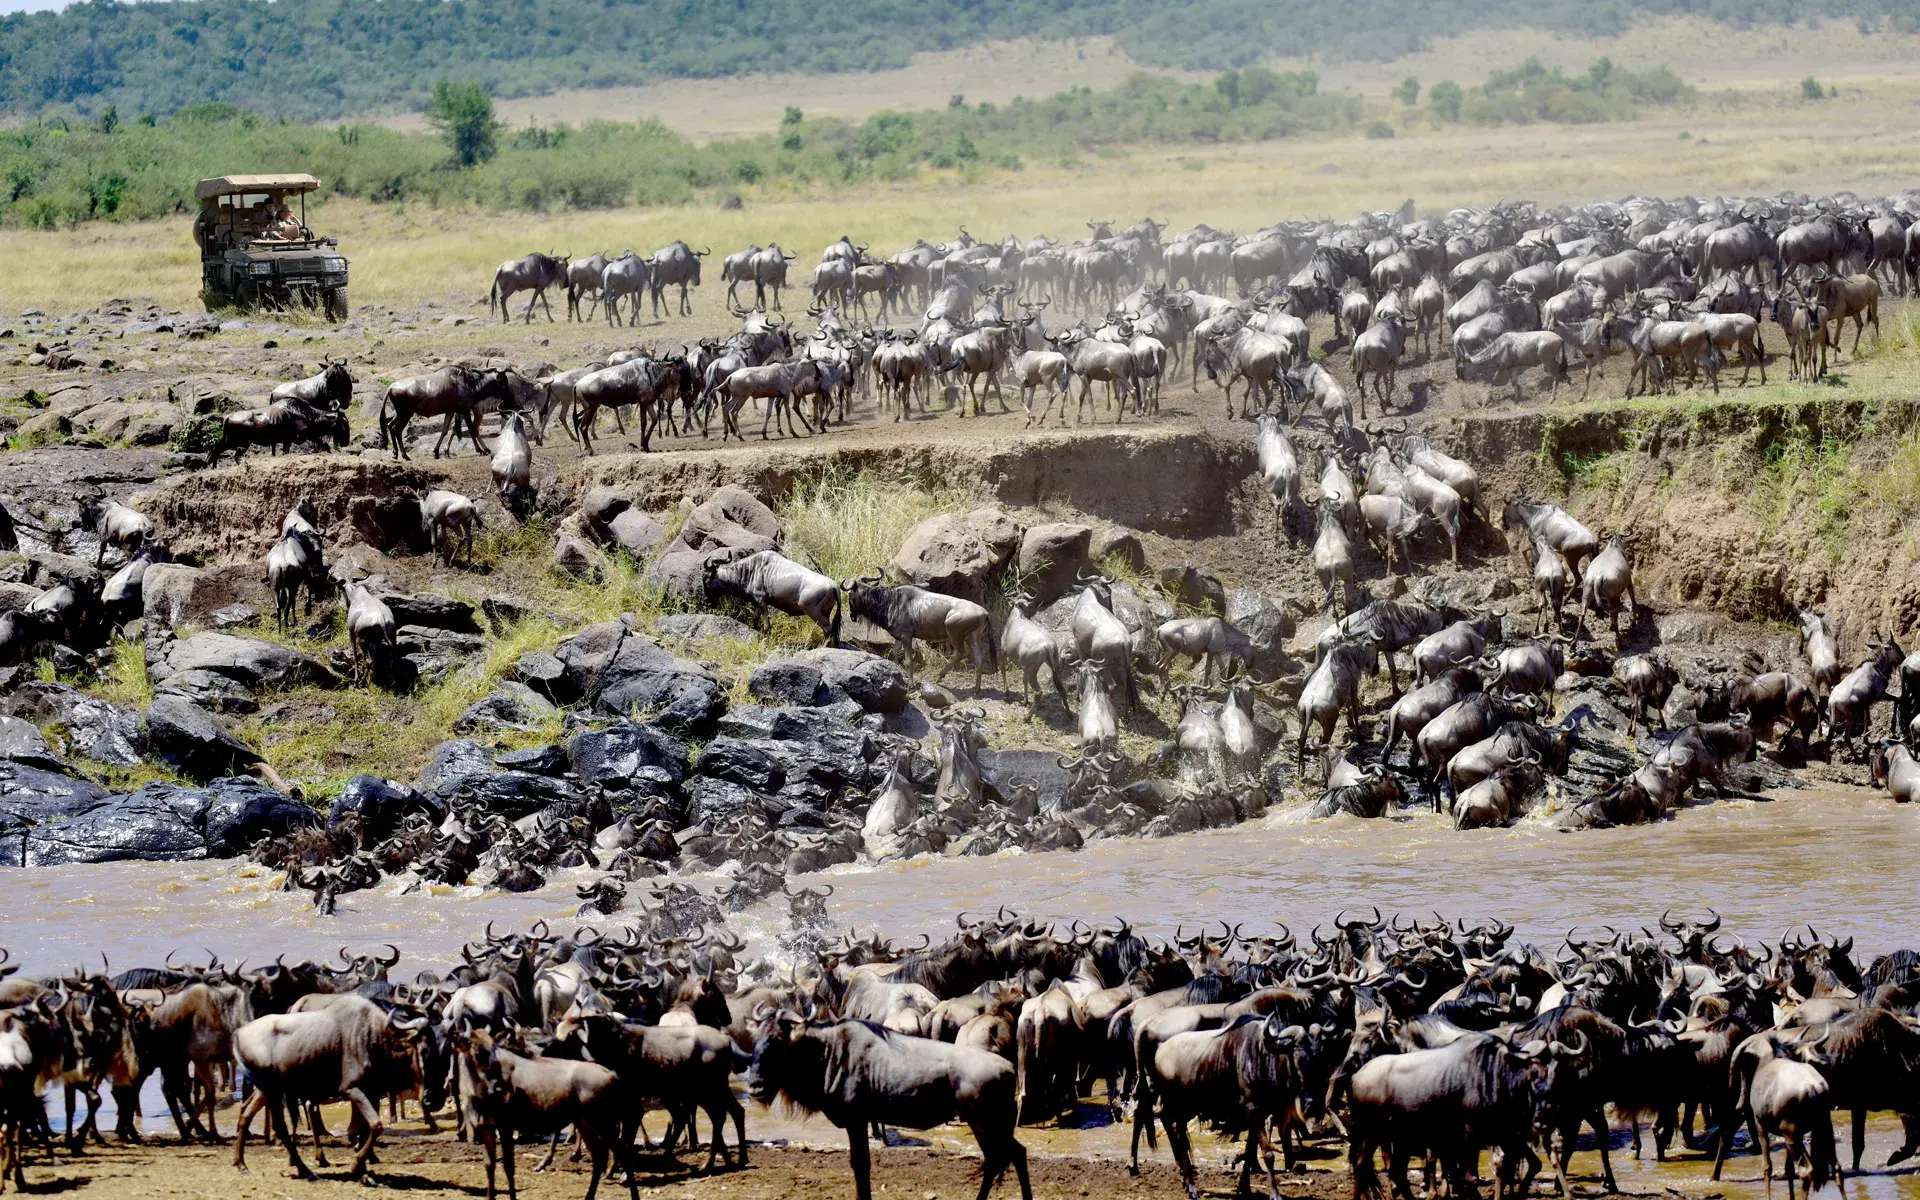 The Great Migration river crossing captured during a game drive at Mara River.